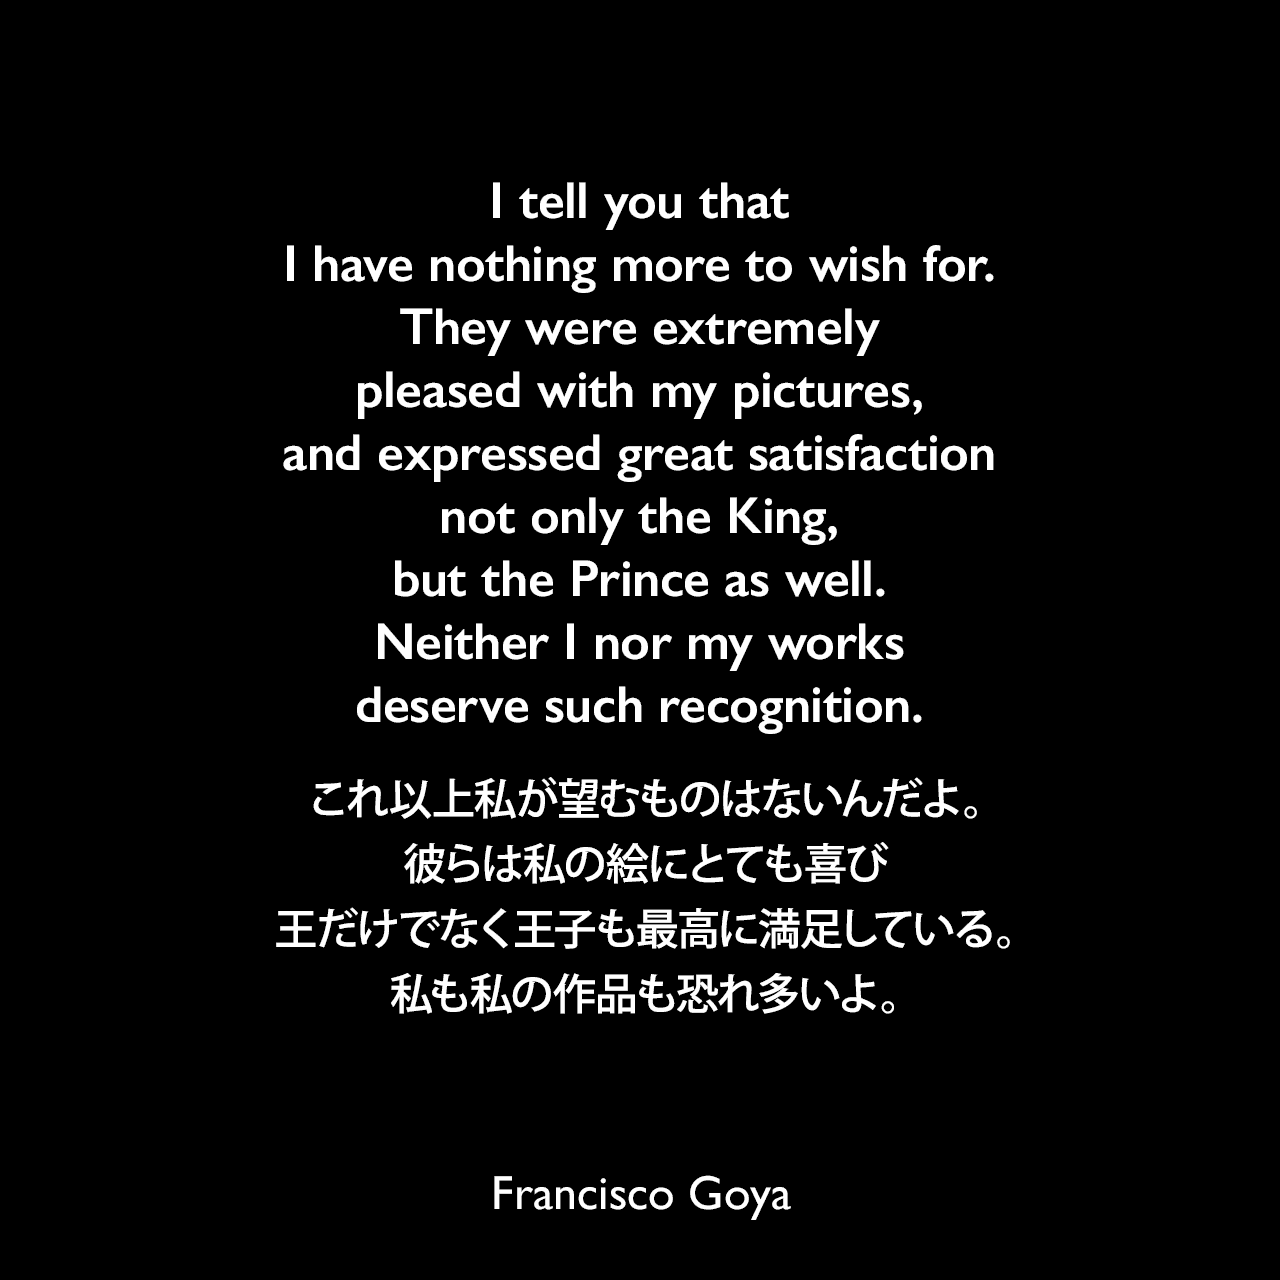 I tell you that I have nothing more to wish for. They were extremely pleased with my pictures, and expressed great satisfaction not only the King, but the Prince as well. Neither I nor my works deserve such recognition.これ以上私が望むものはないんだよ。彼らは私の絵にとても喜び、王だけでなく王子も最高に満足している。私も私の作品も恐れ多いよ。- 1779年1月 ゴヤの親友「Don Martín Zapater」へ宛てた手紙よりFrancisco Goya